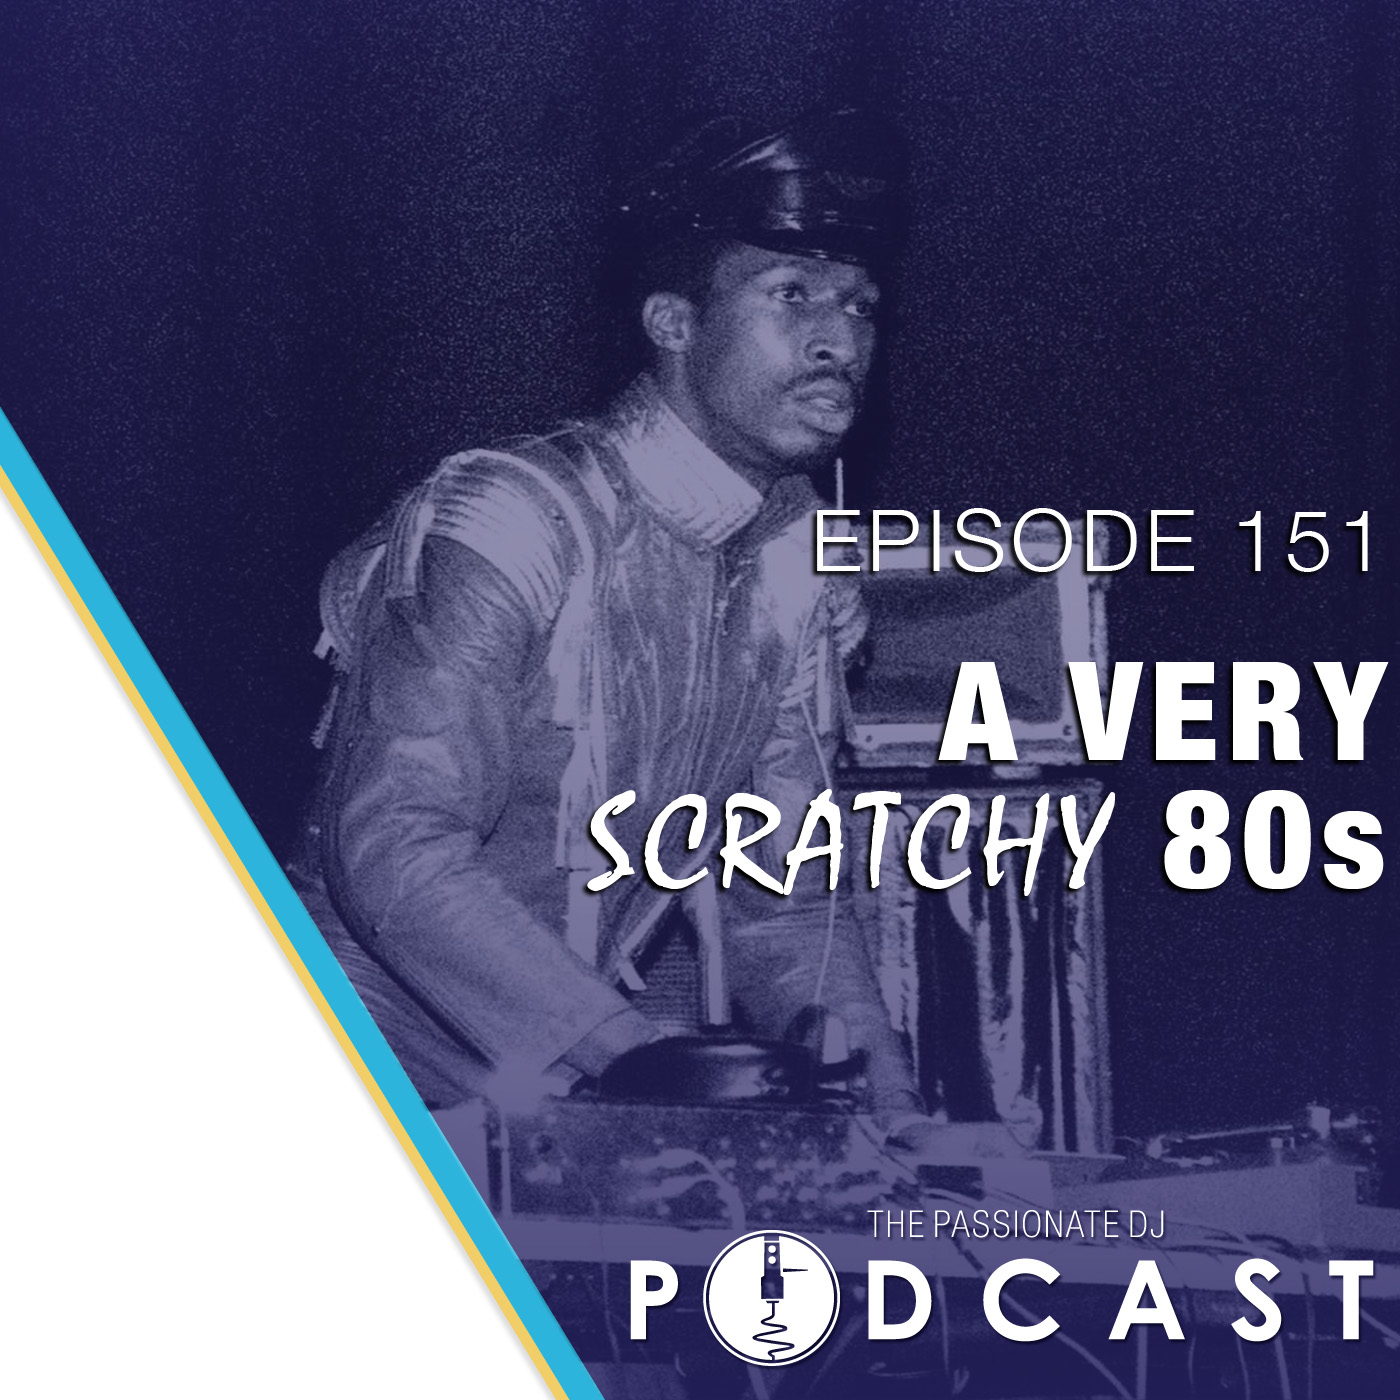 Episode 151: A Very Scratchy 80s